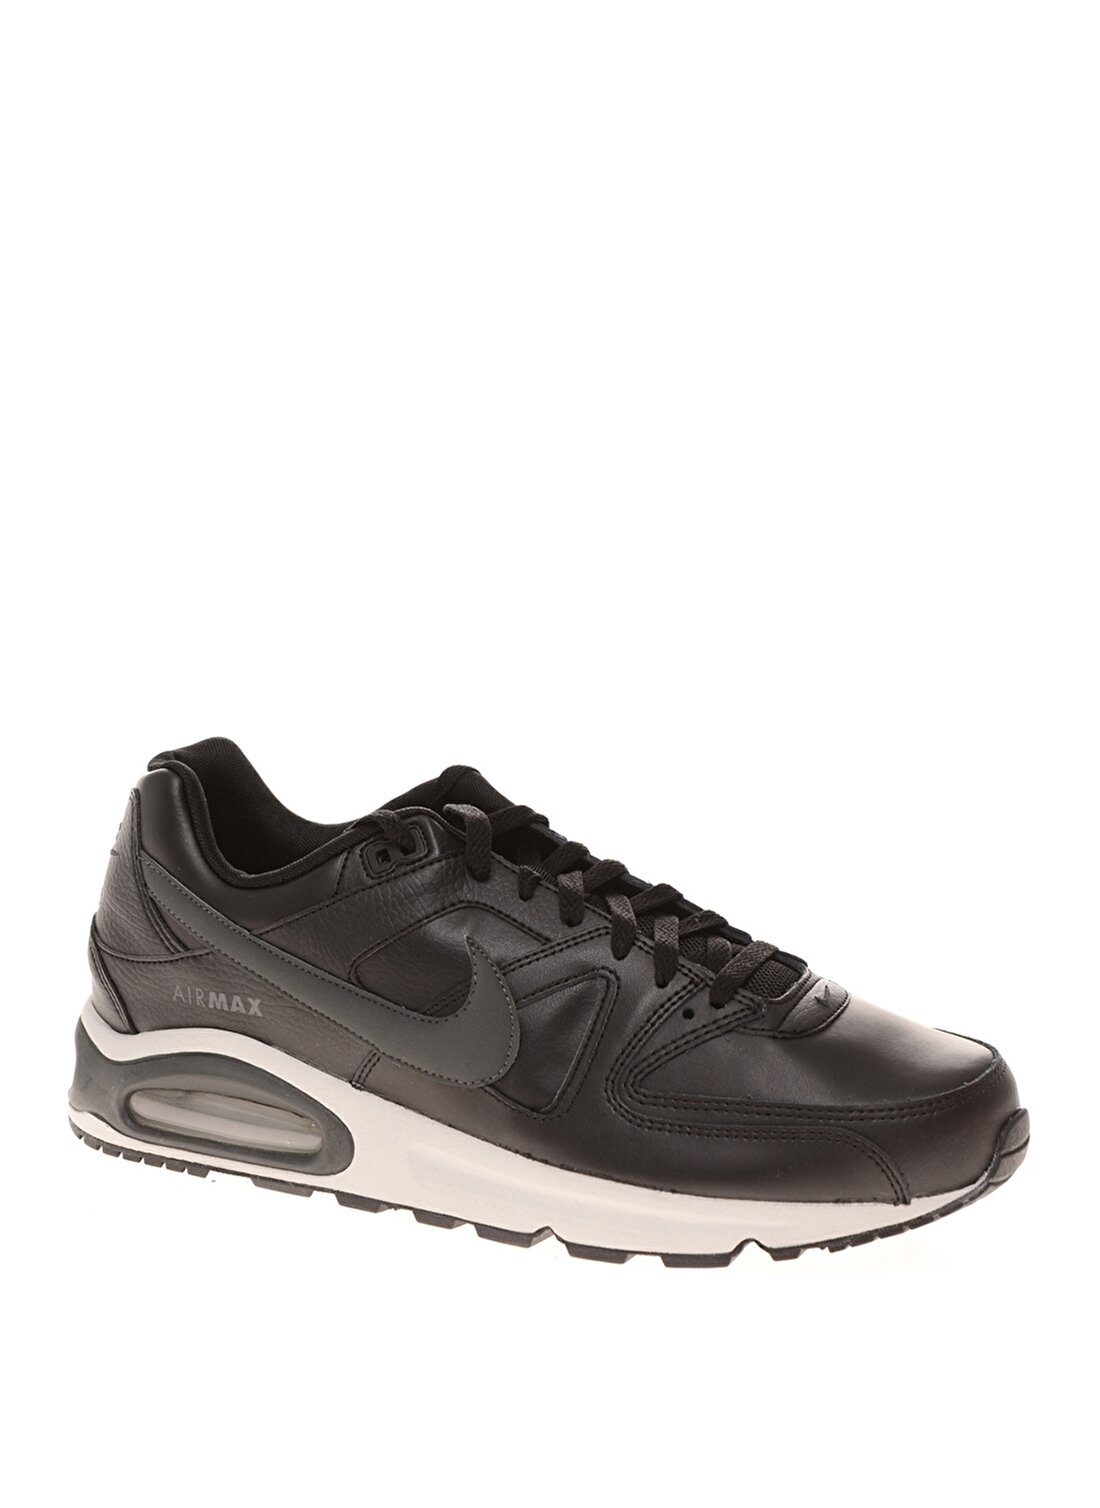 Nike Air Max Command Leather 749760-001 Lifestyle Ayakkabı